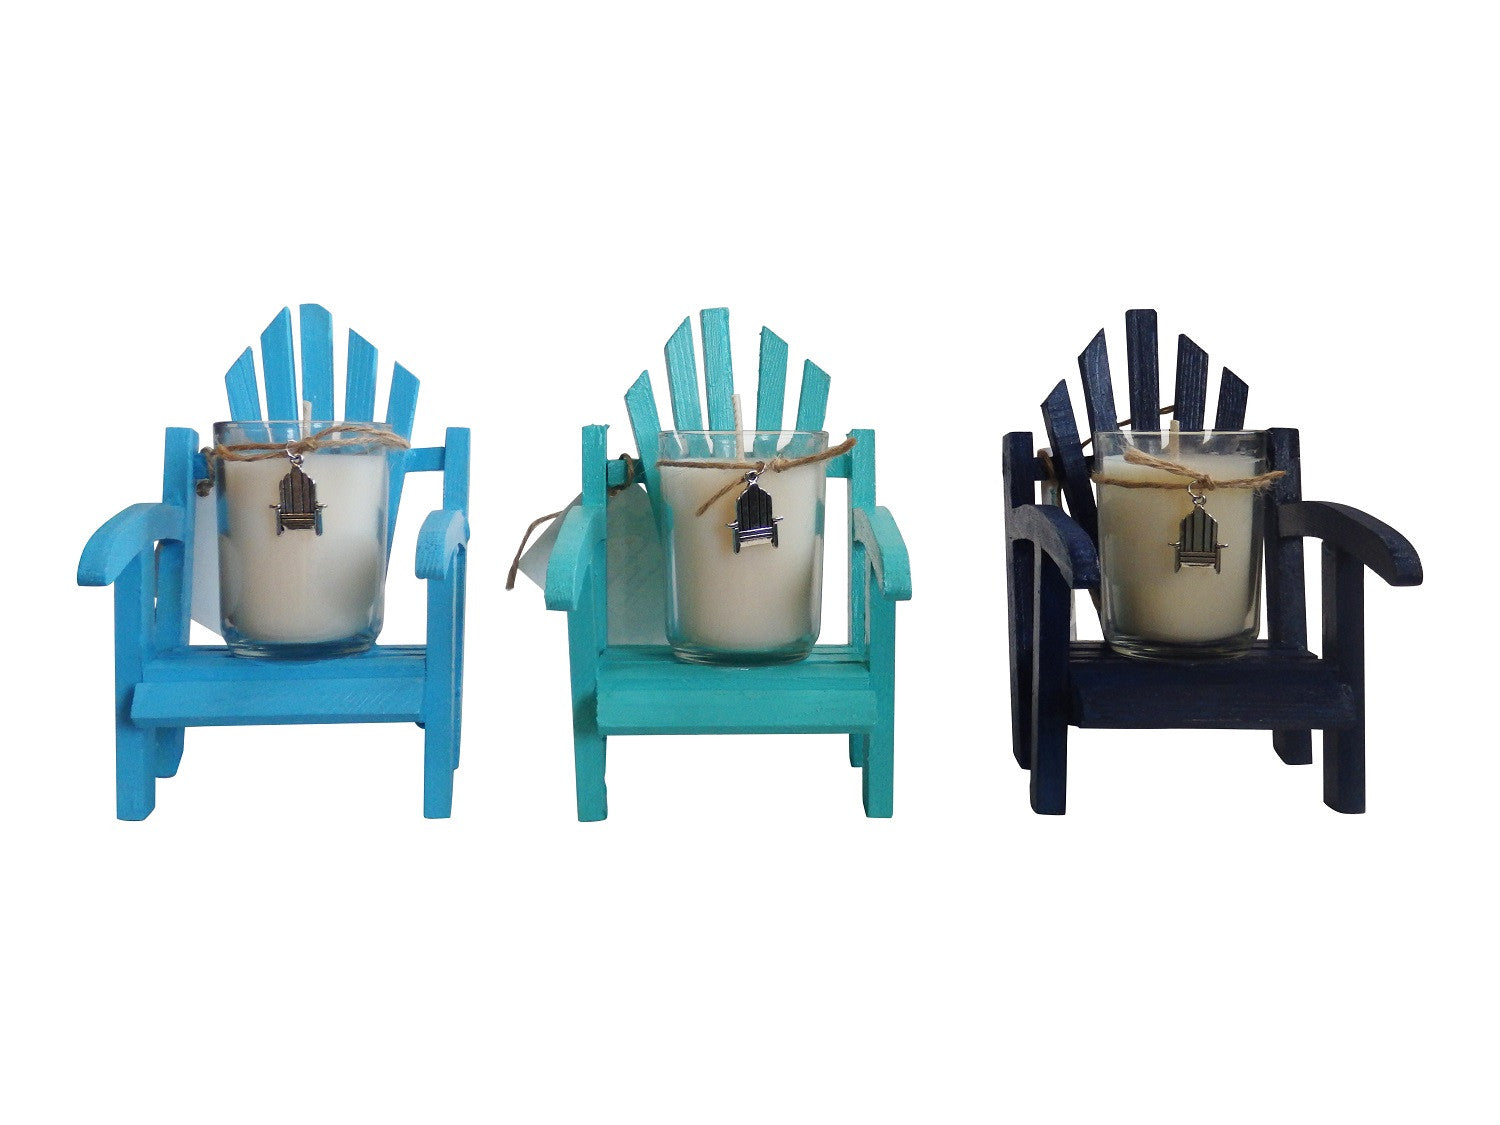 Luxury Miniature Aqua Adirondack Chair Candle Comes With A Free